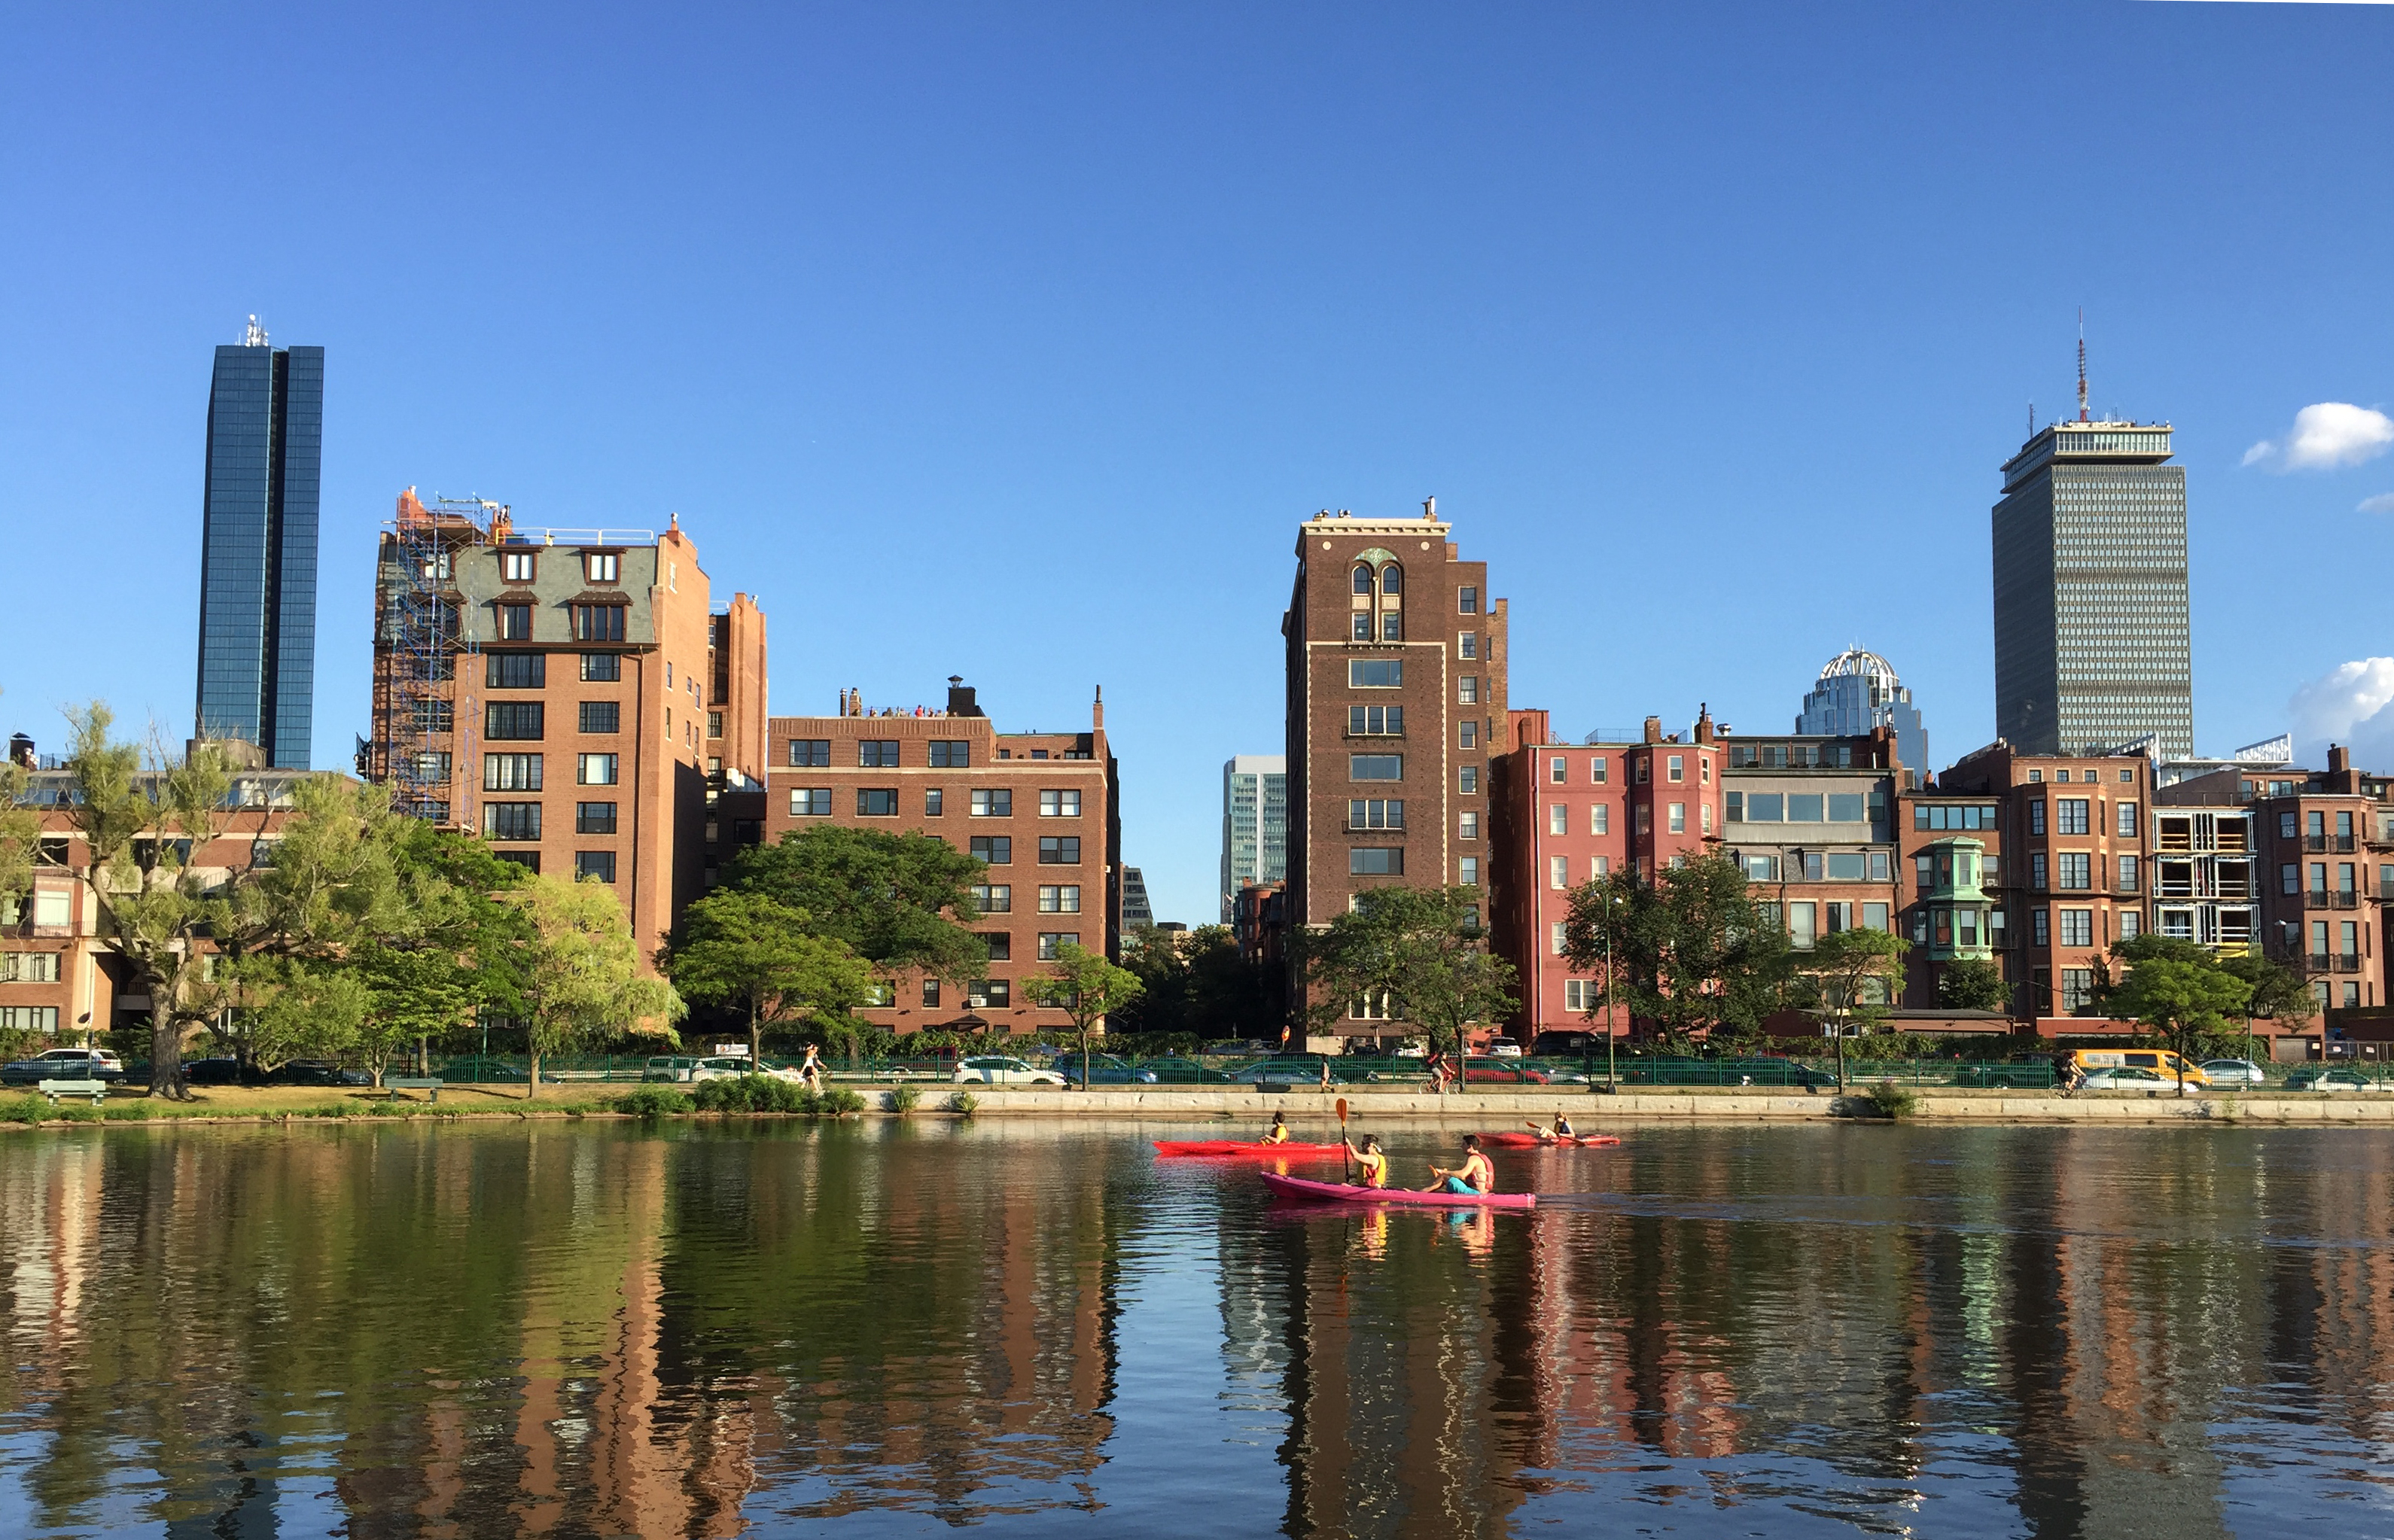 100 things to do in Boston this weekend [08/05/16]